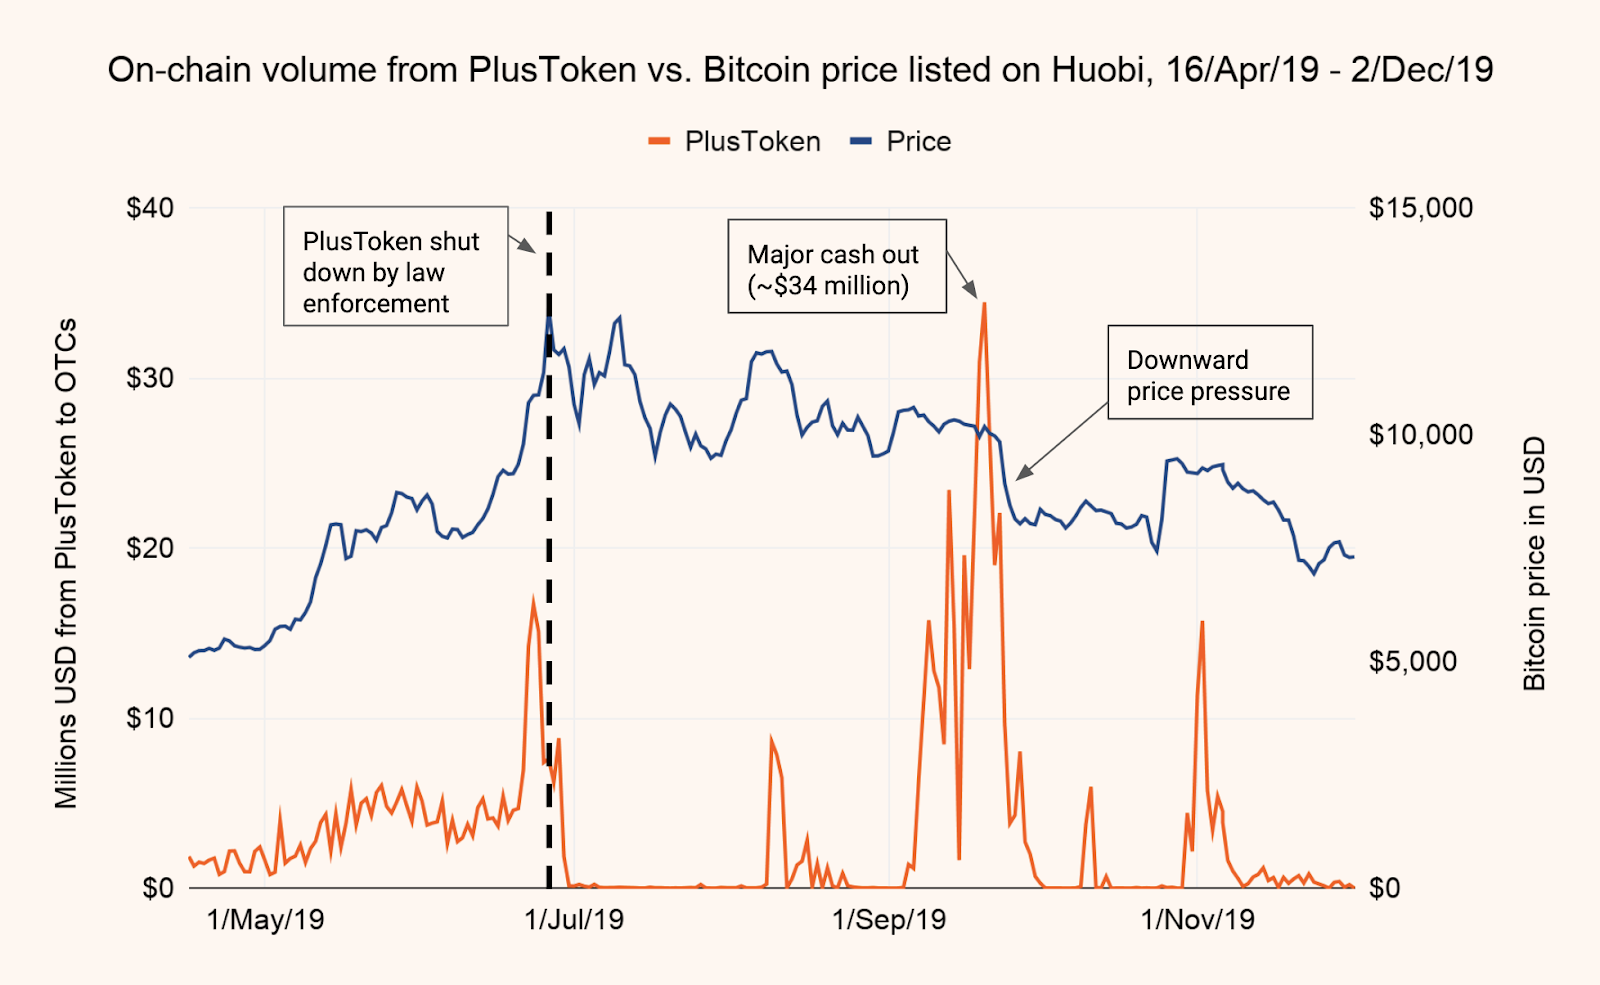 Plustoken Cash-Outs Could Be Behind BTC Price Drop, Says Report